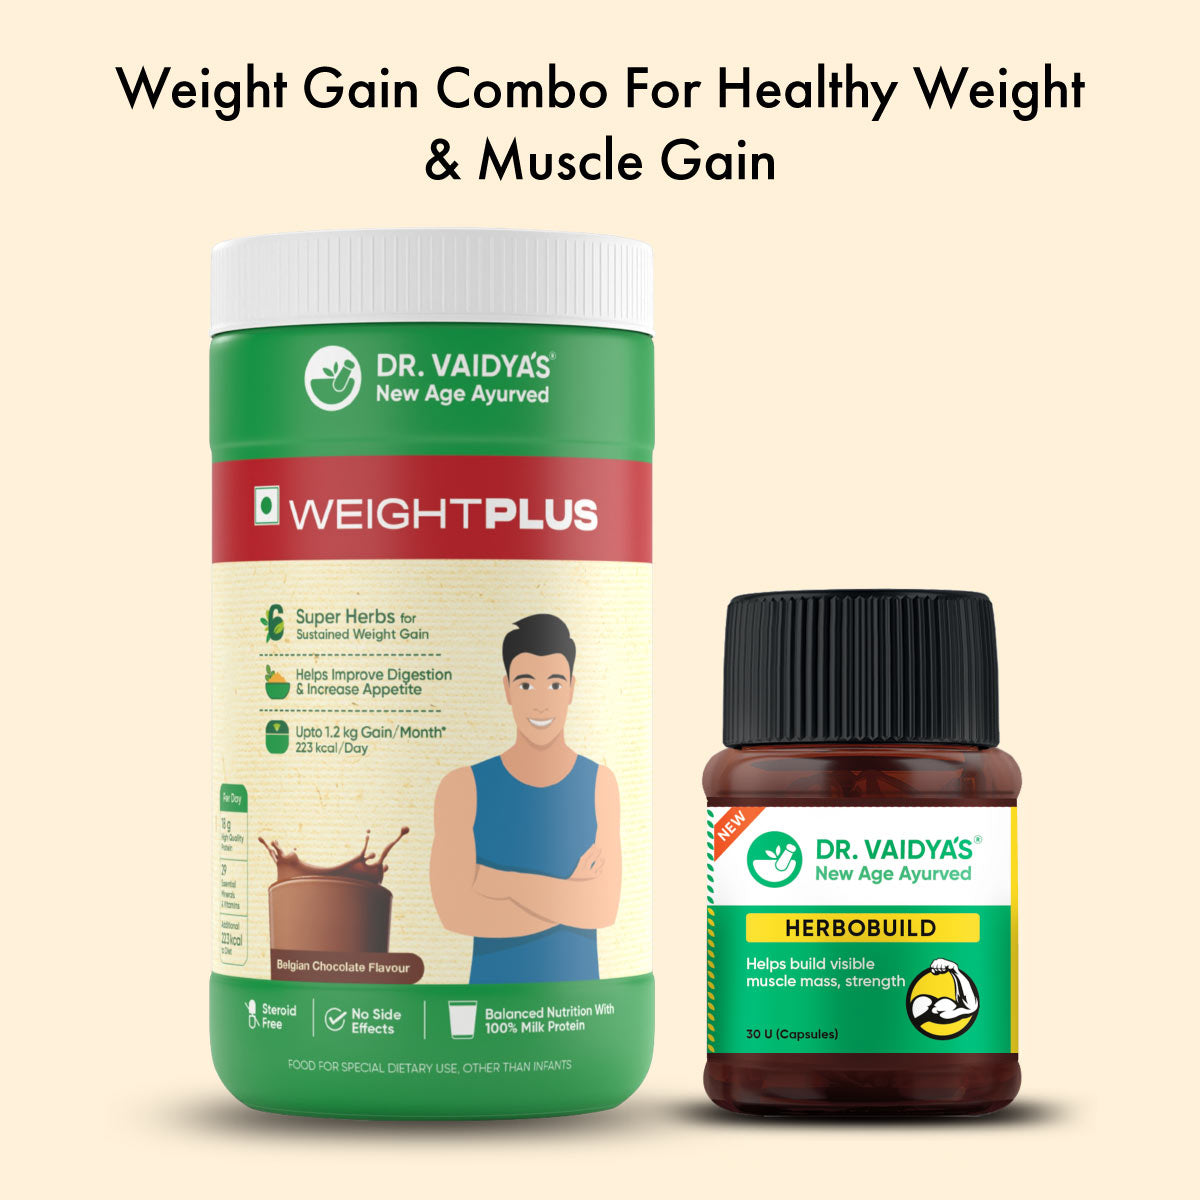 Weight Gain Combo: For Healthy Weight & Muscle Gain